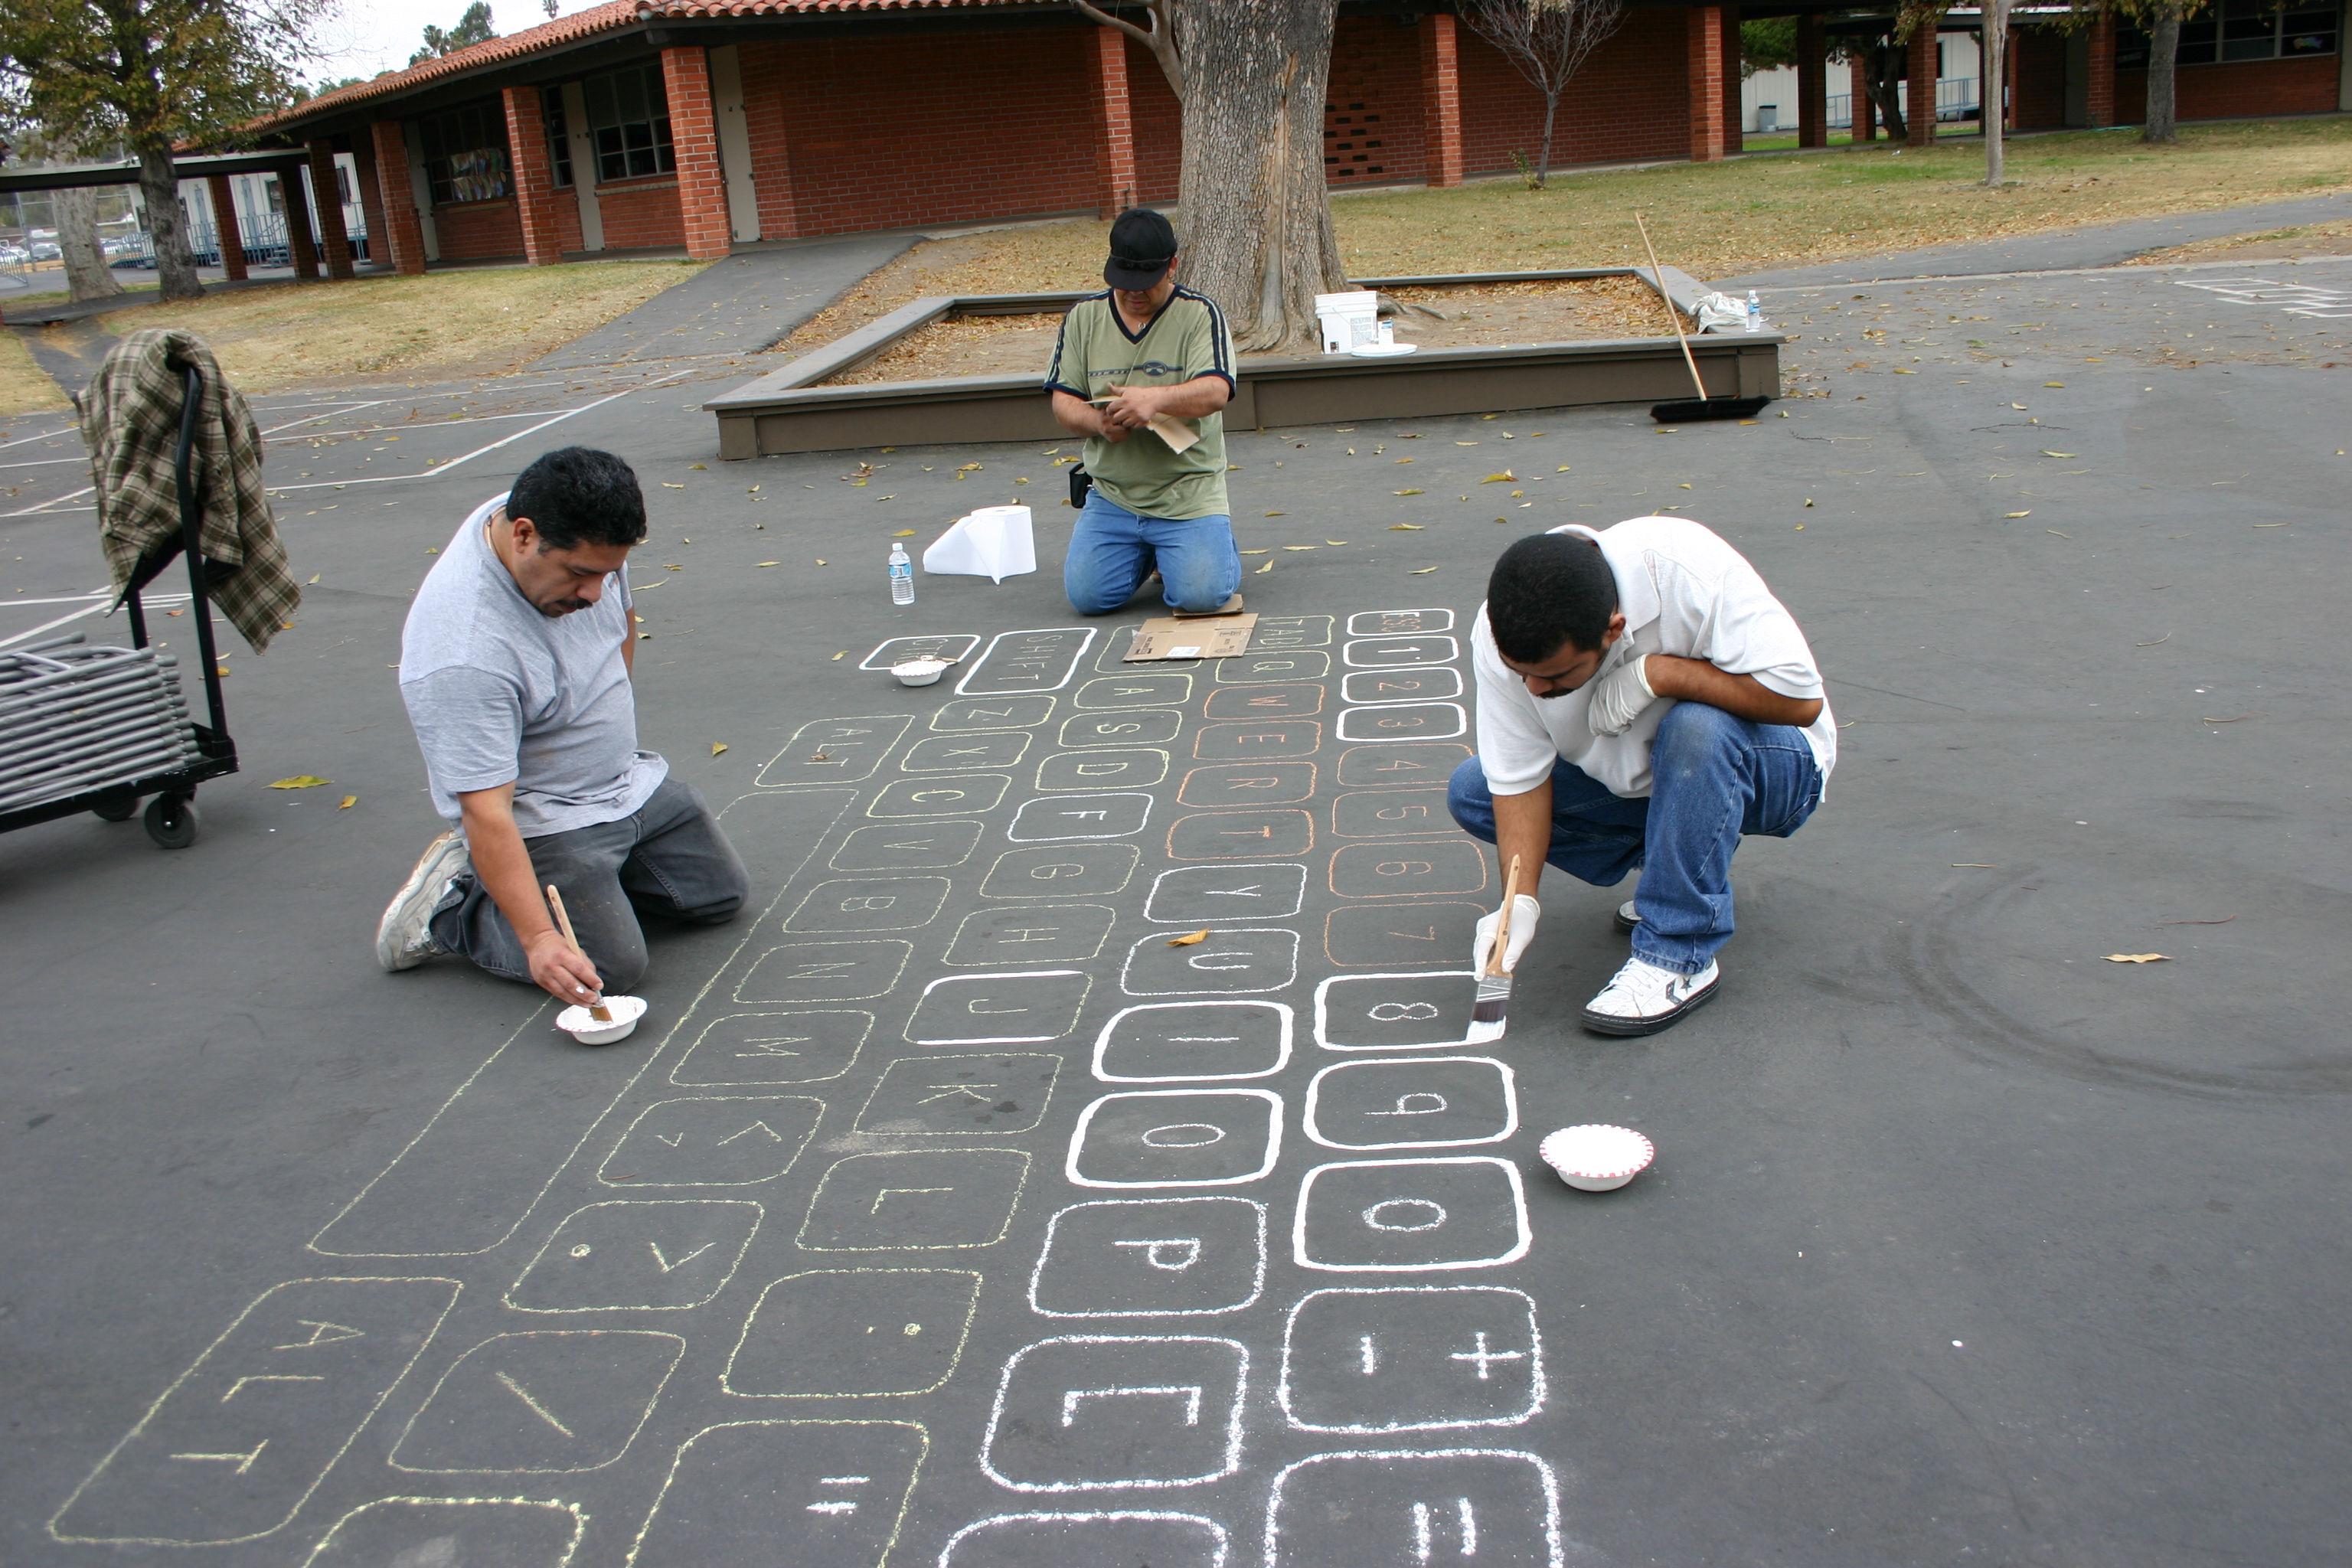 Staff Painting numbers